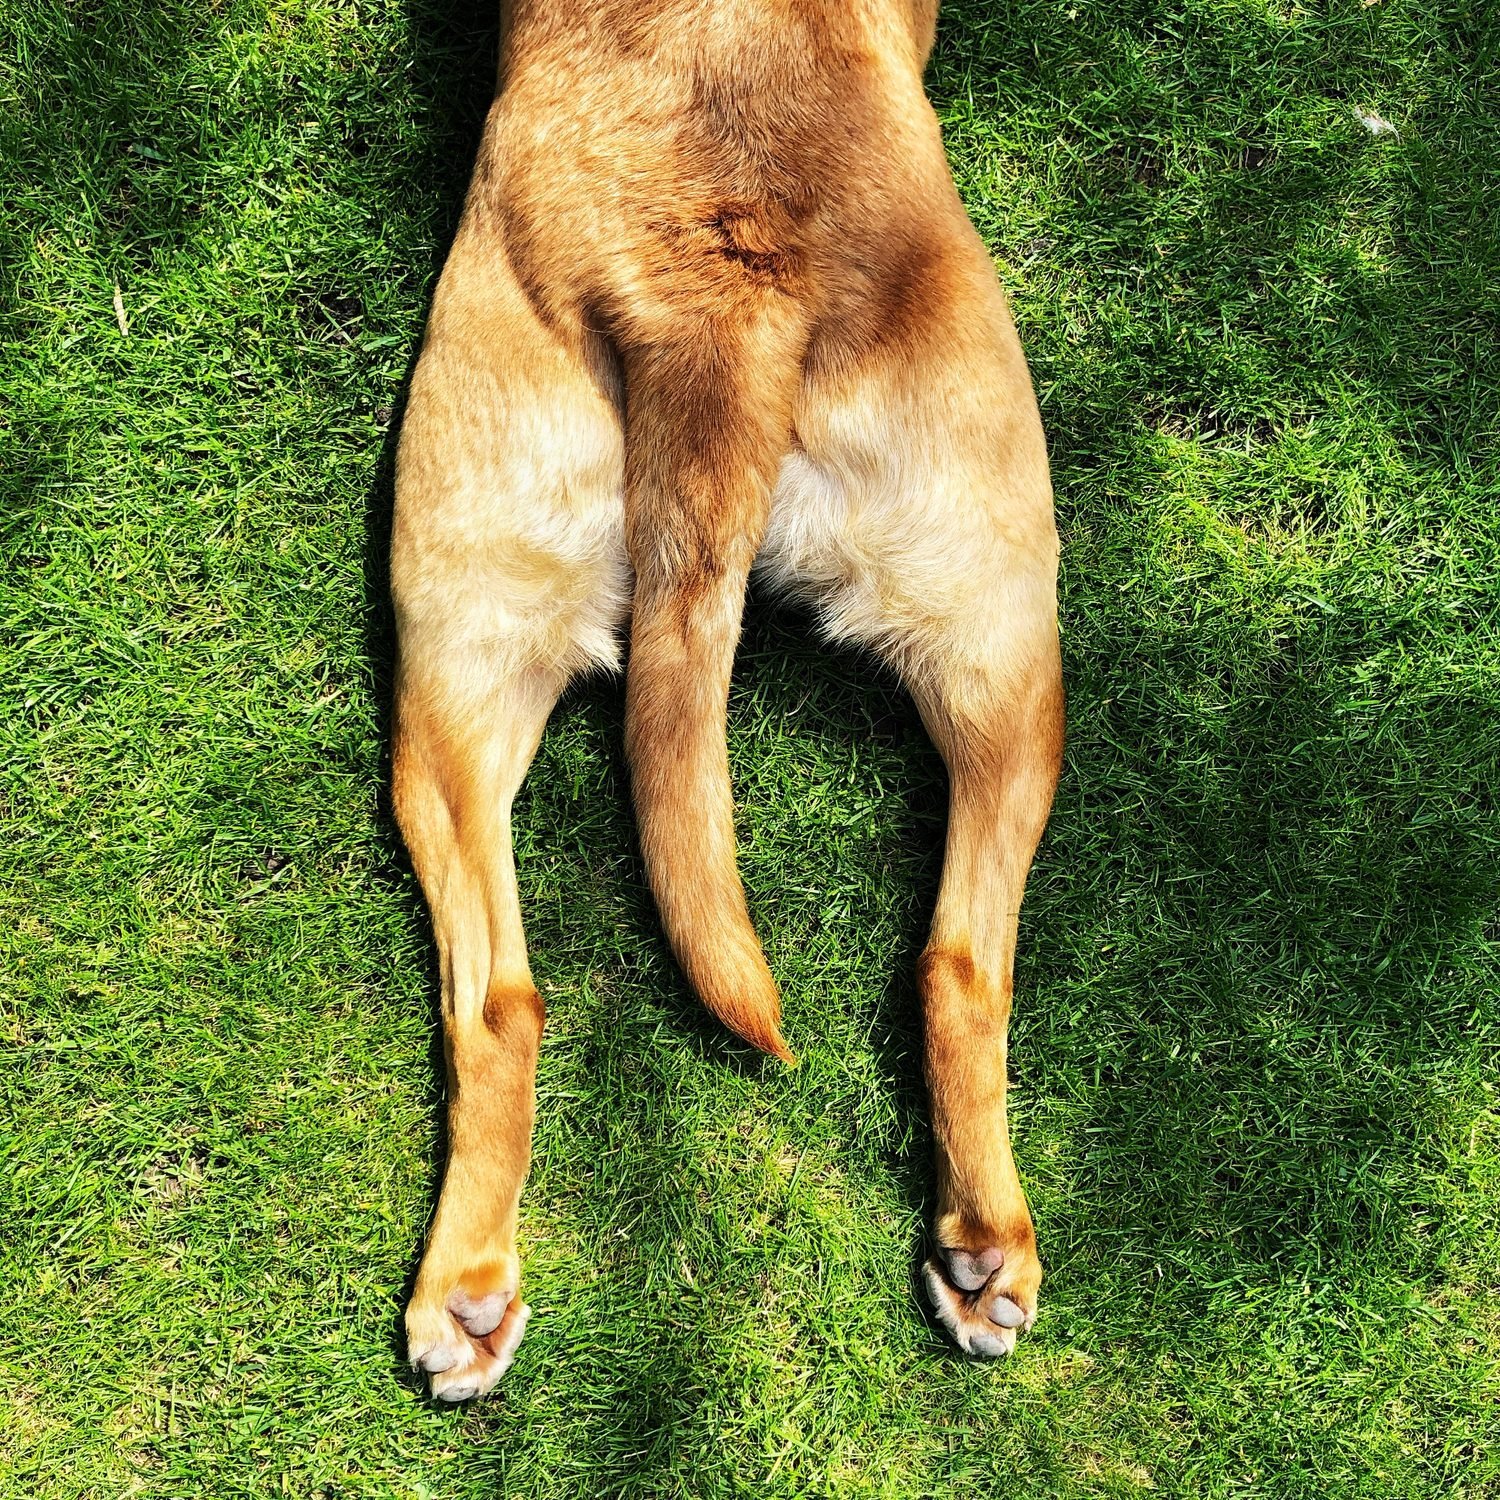 Funny pet image of a dog with outstretched back legs in a sploot position